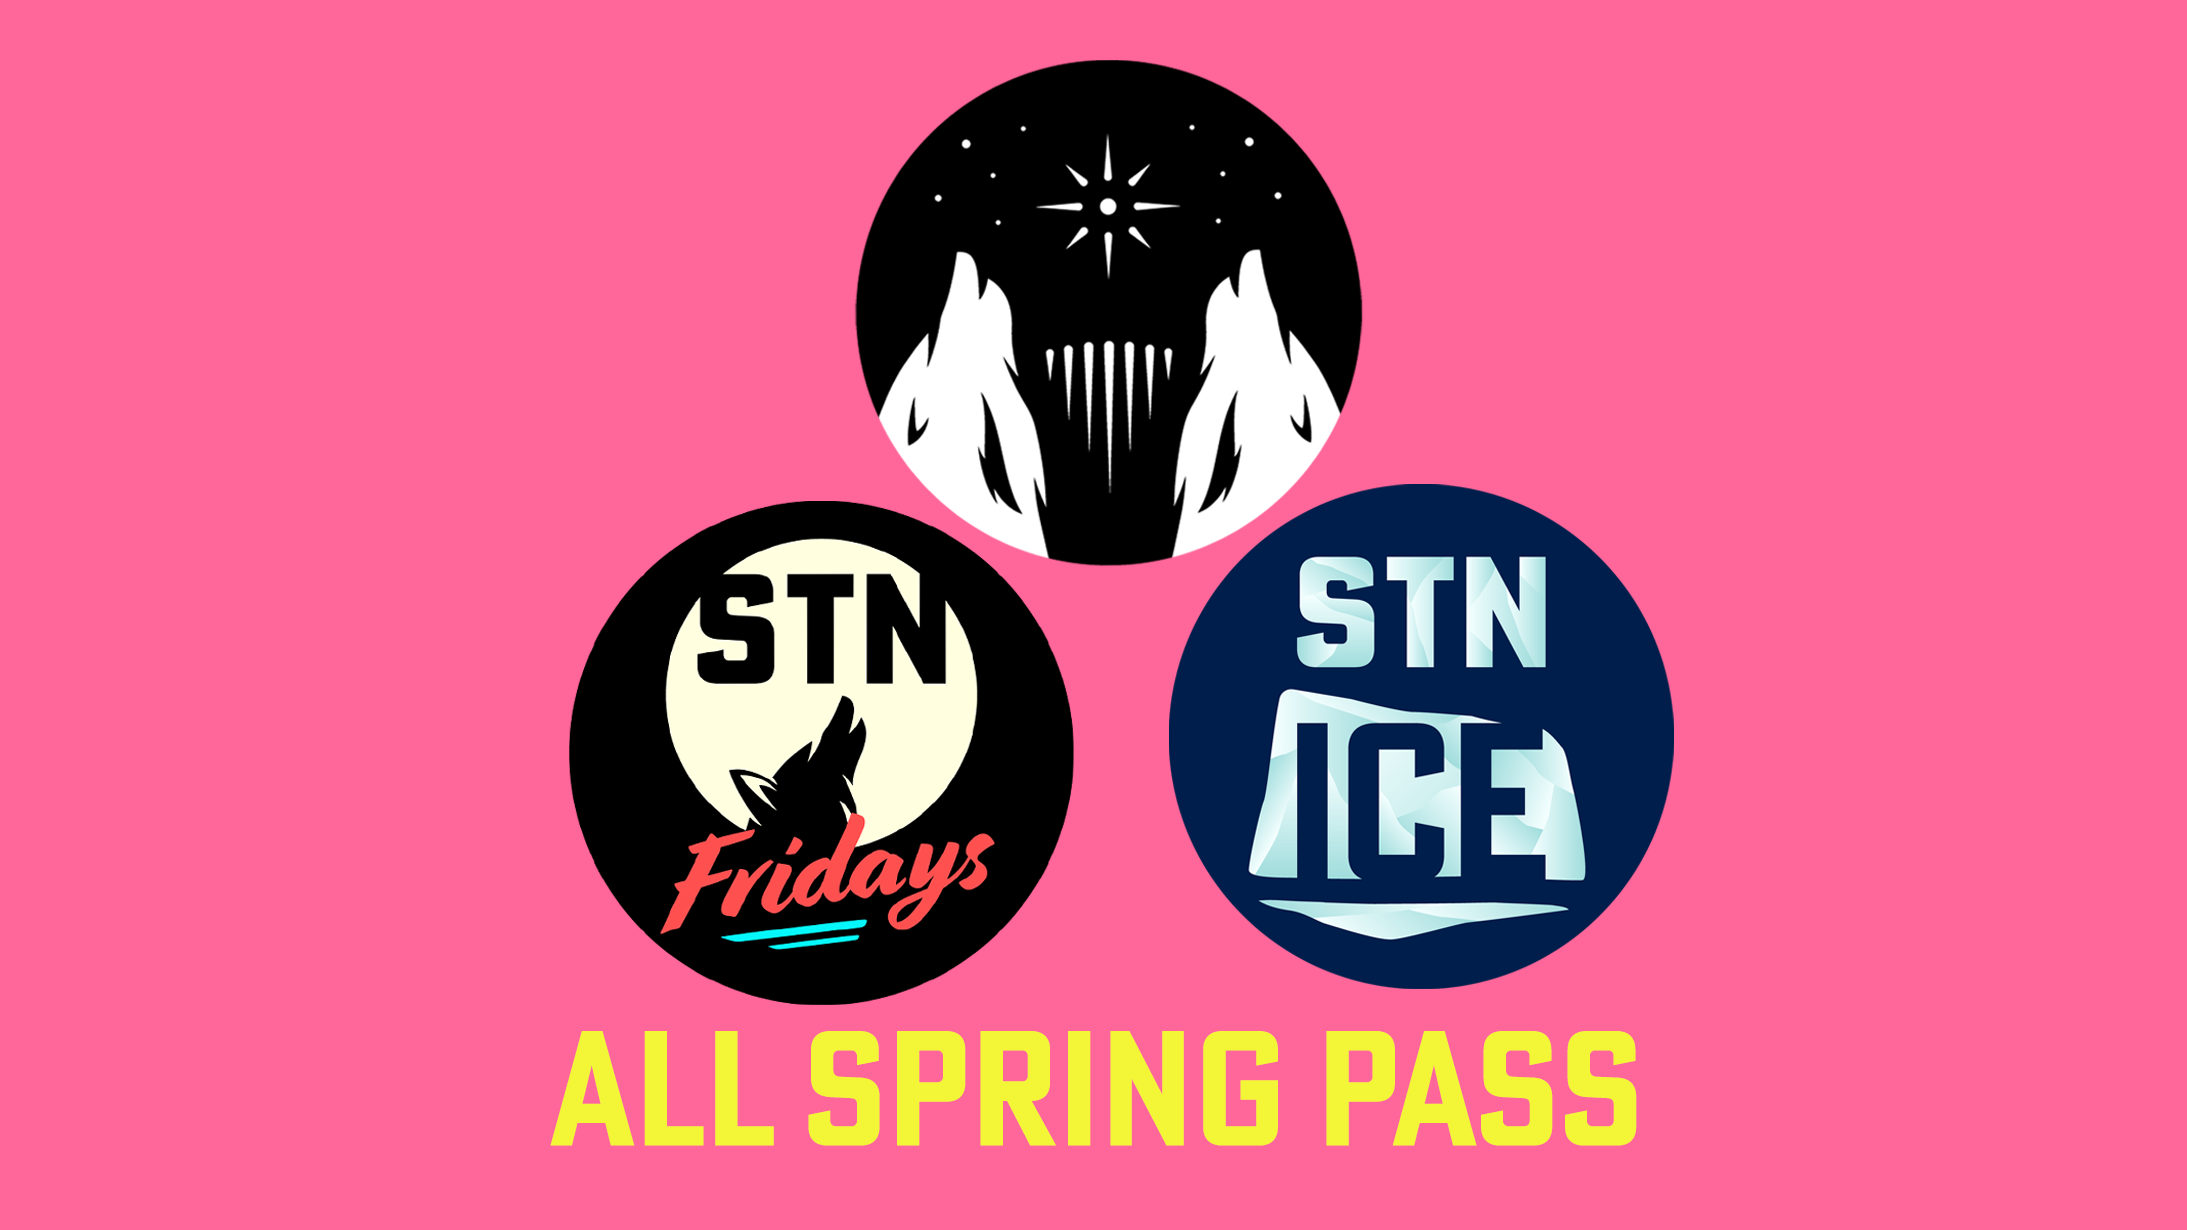 All Spring Pass